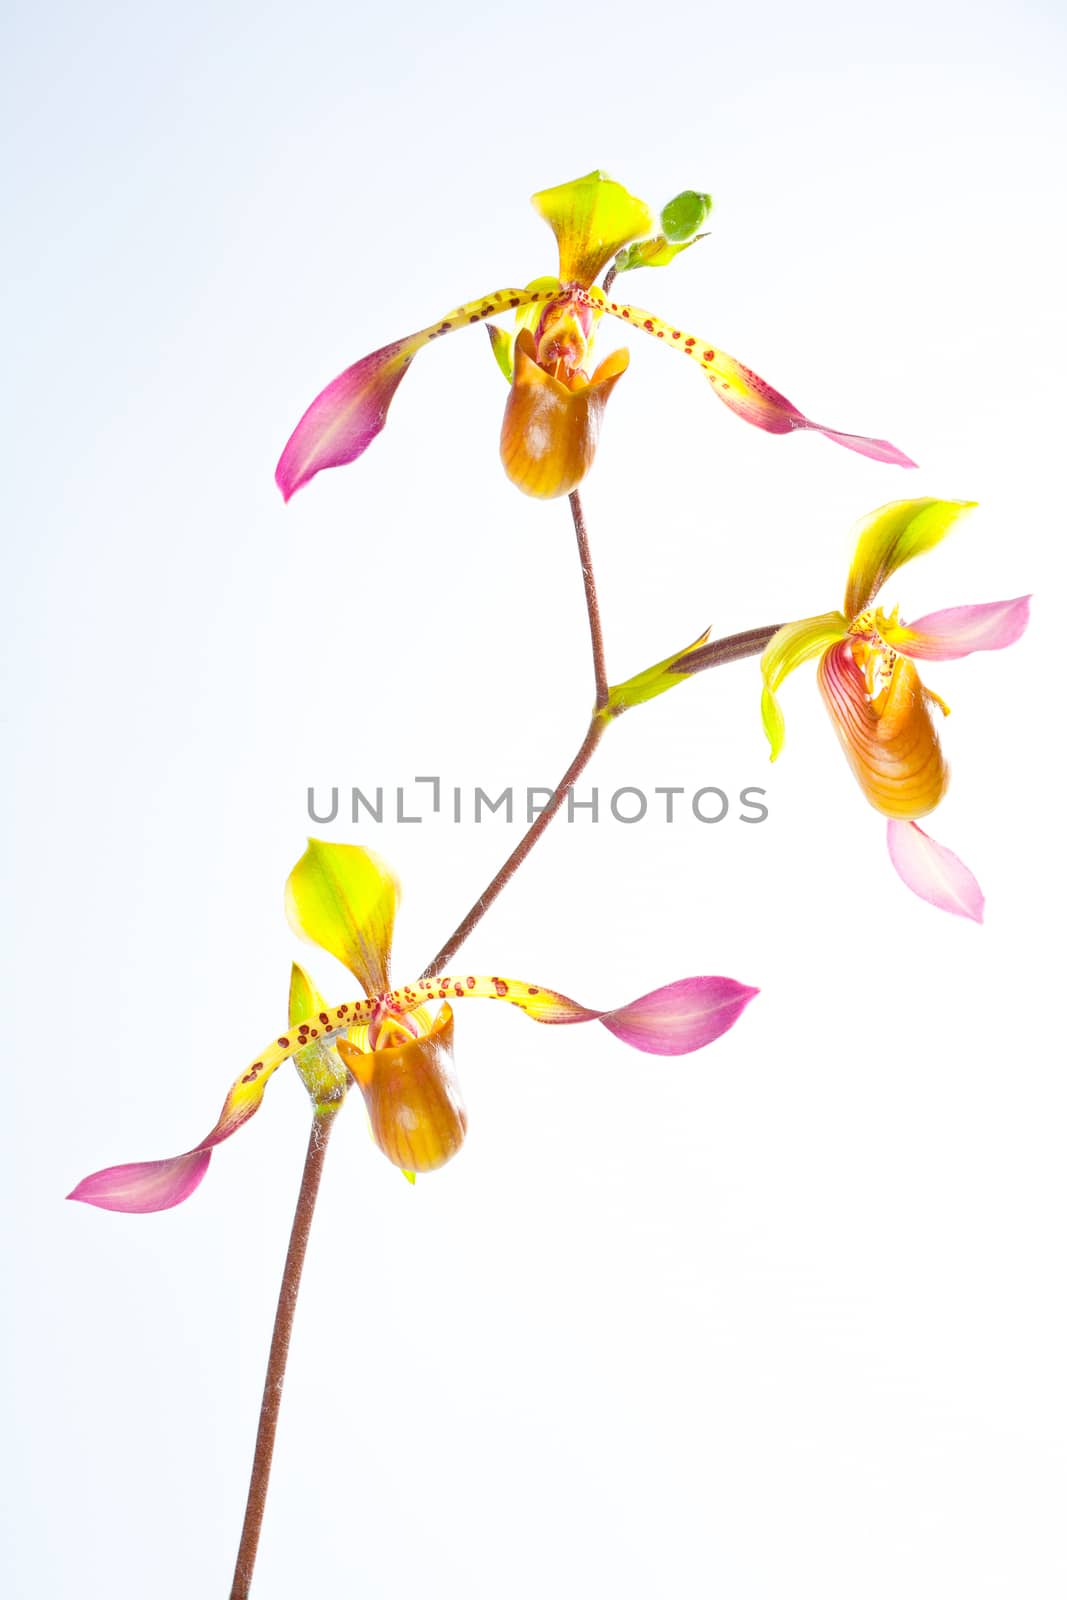 Paphiopedilum lowii by jee1999